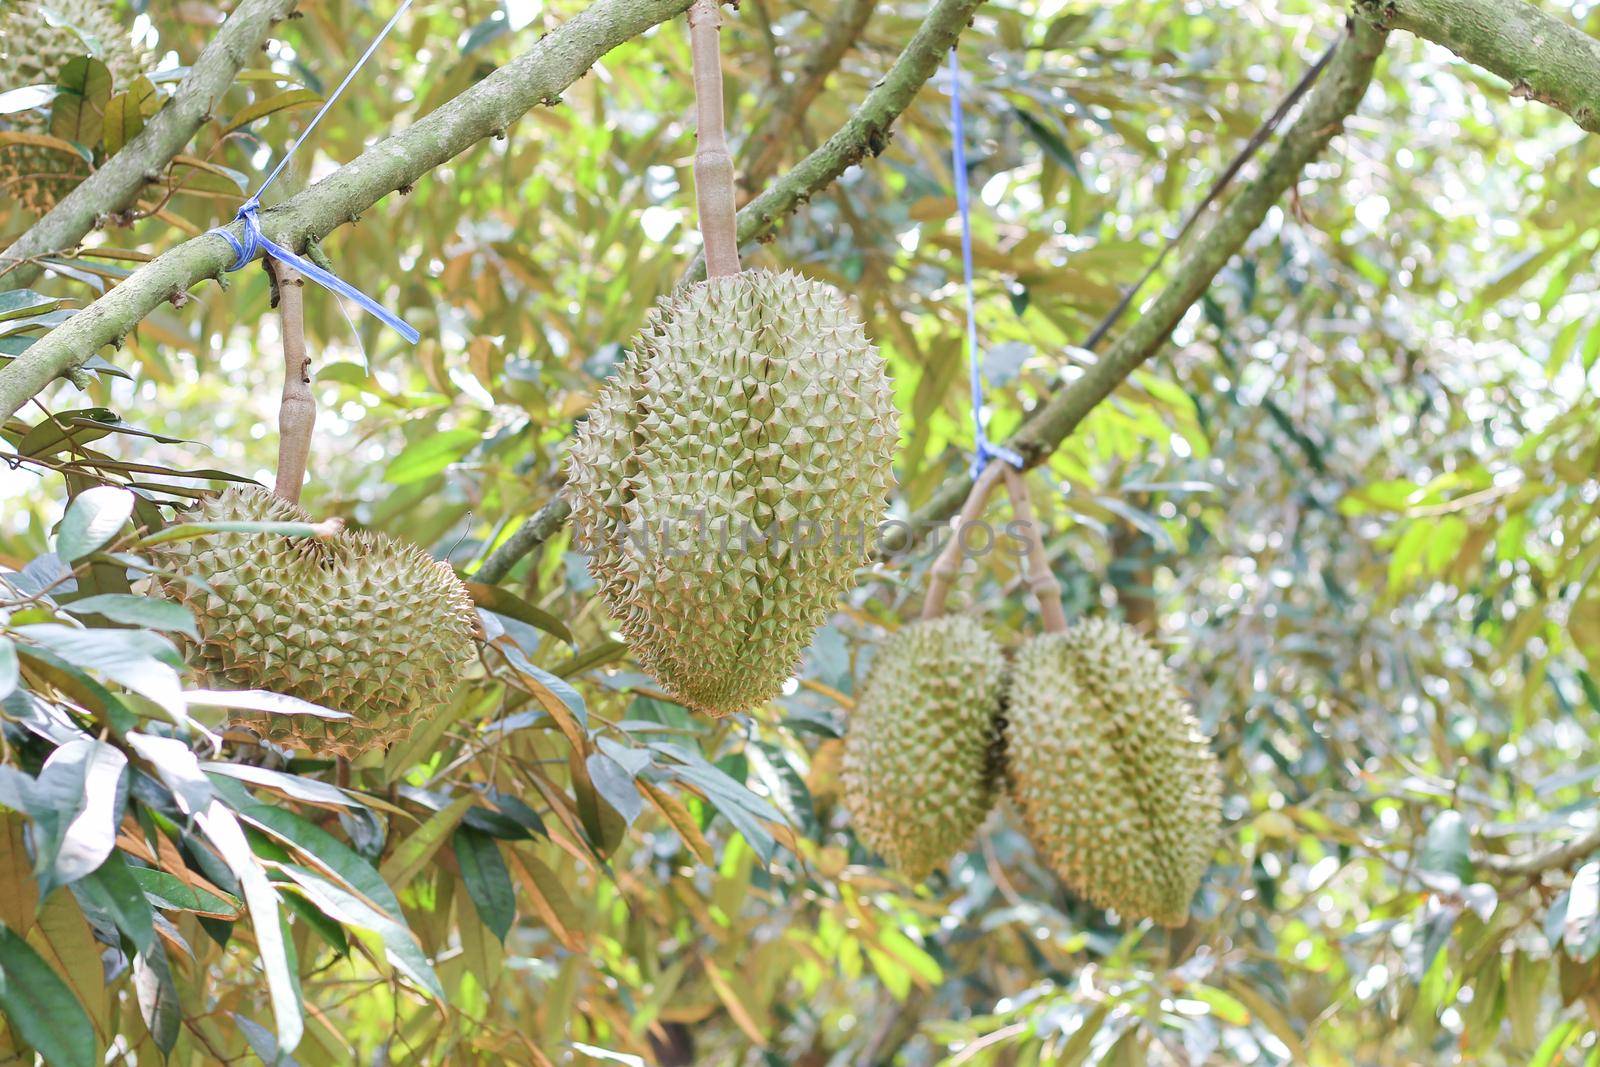 durians on the durian tree in an organic durian orchard. by pichai25